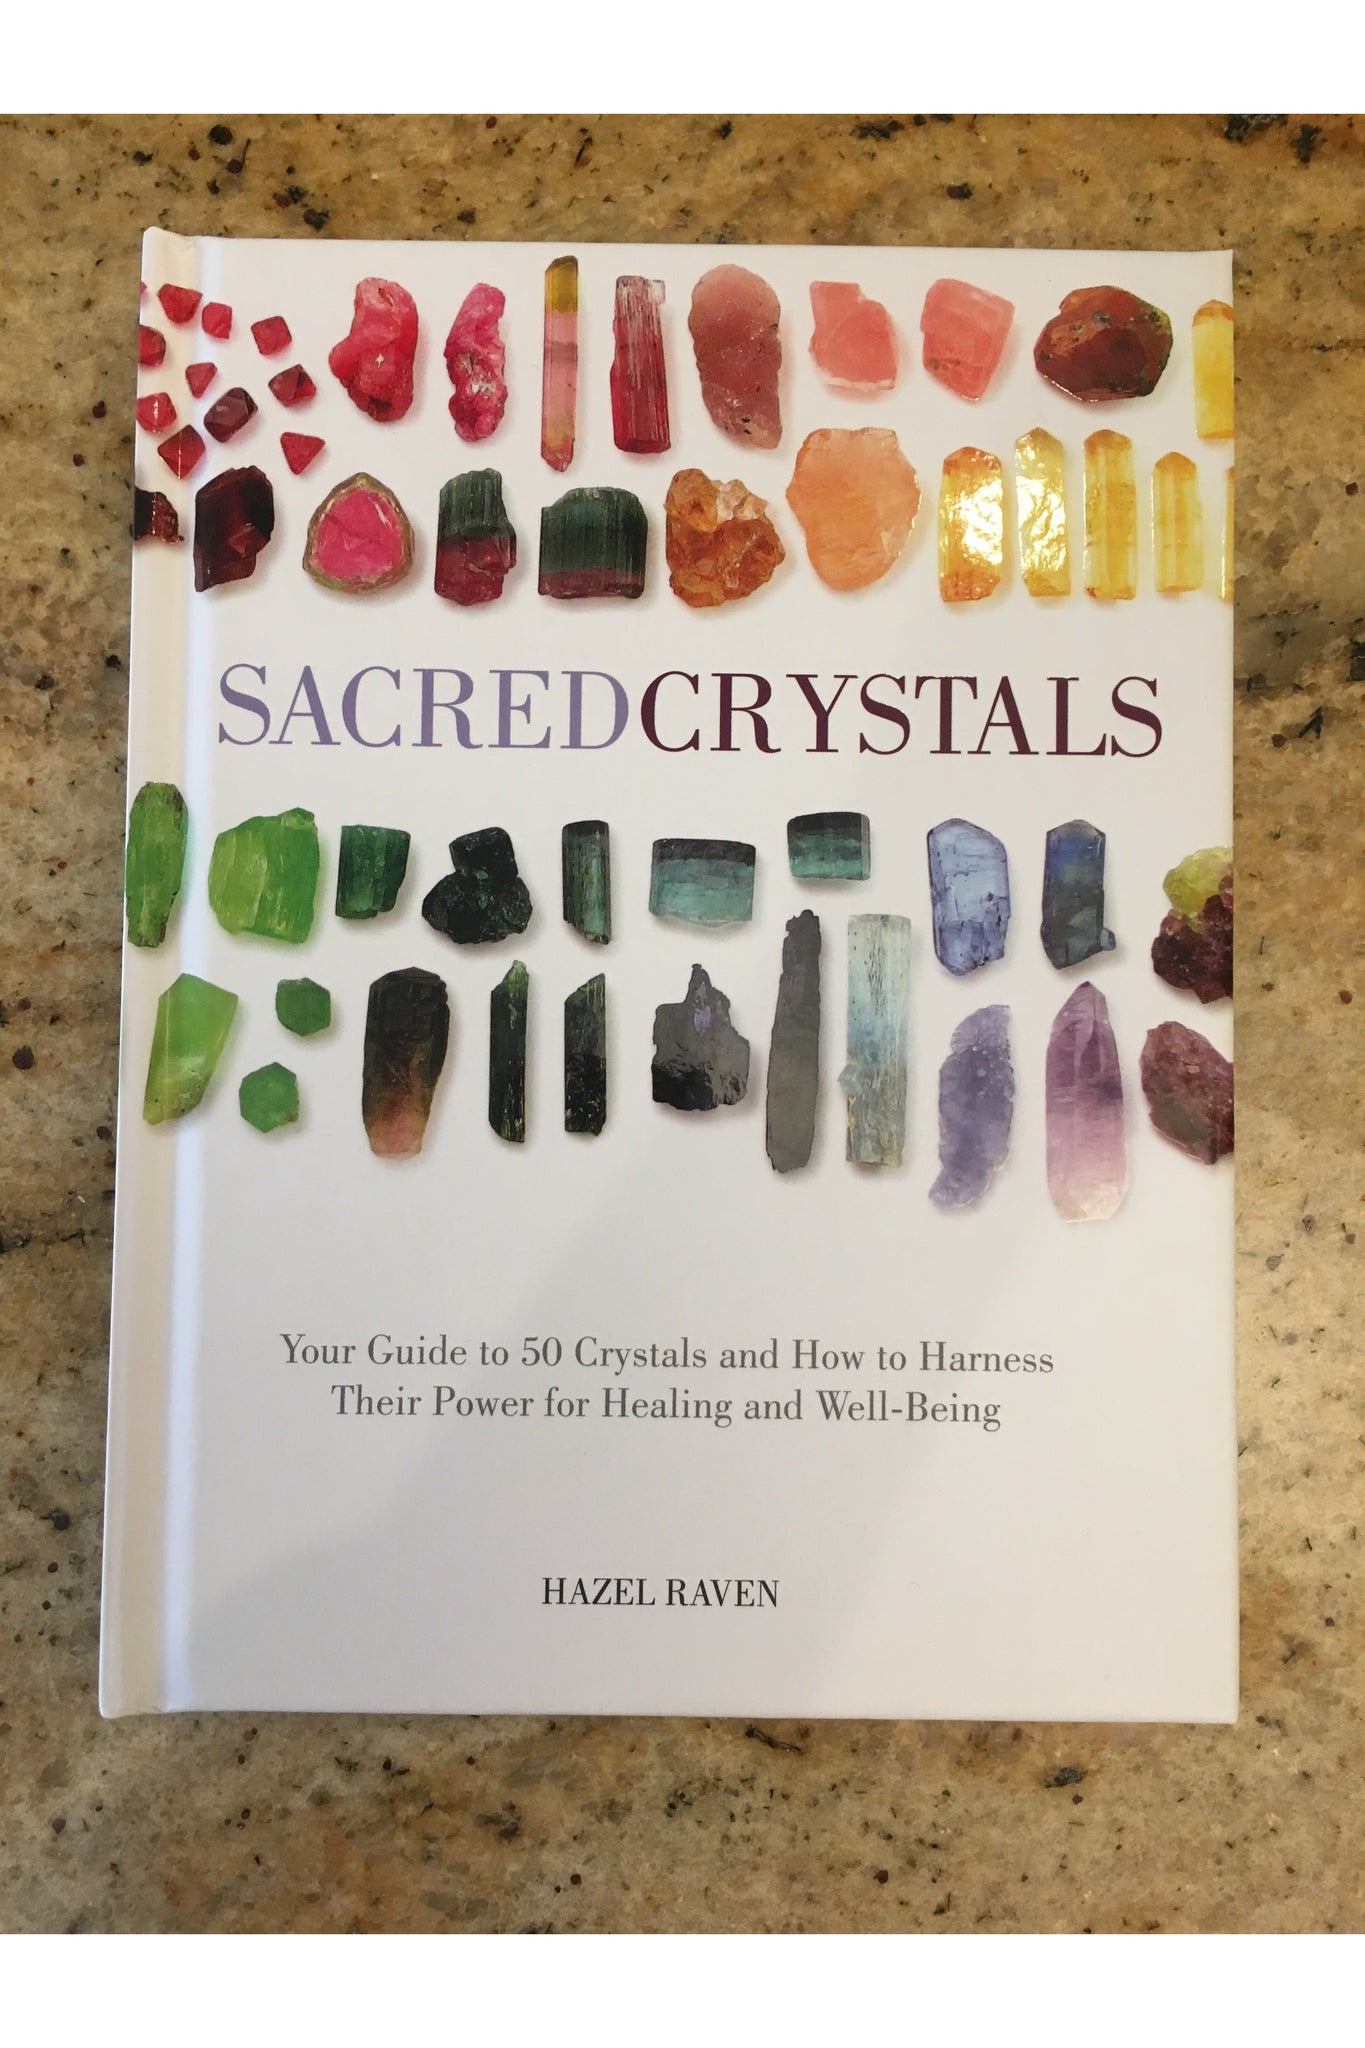 Sacred Crystals Book Majestic Hudson Lifestyle Experiences Books